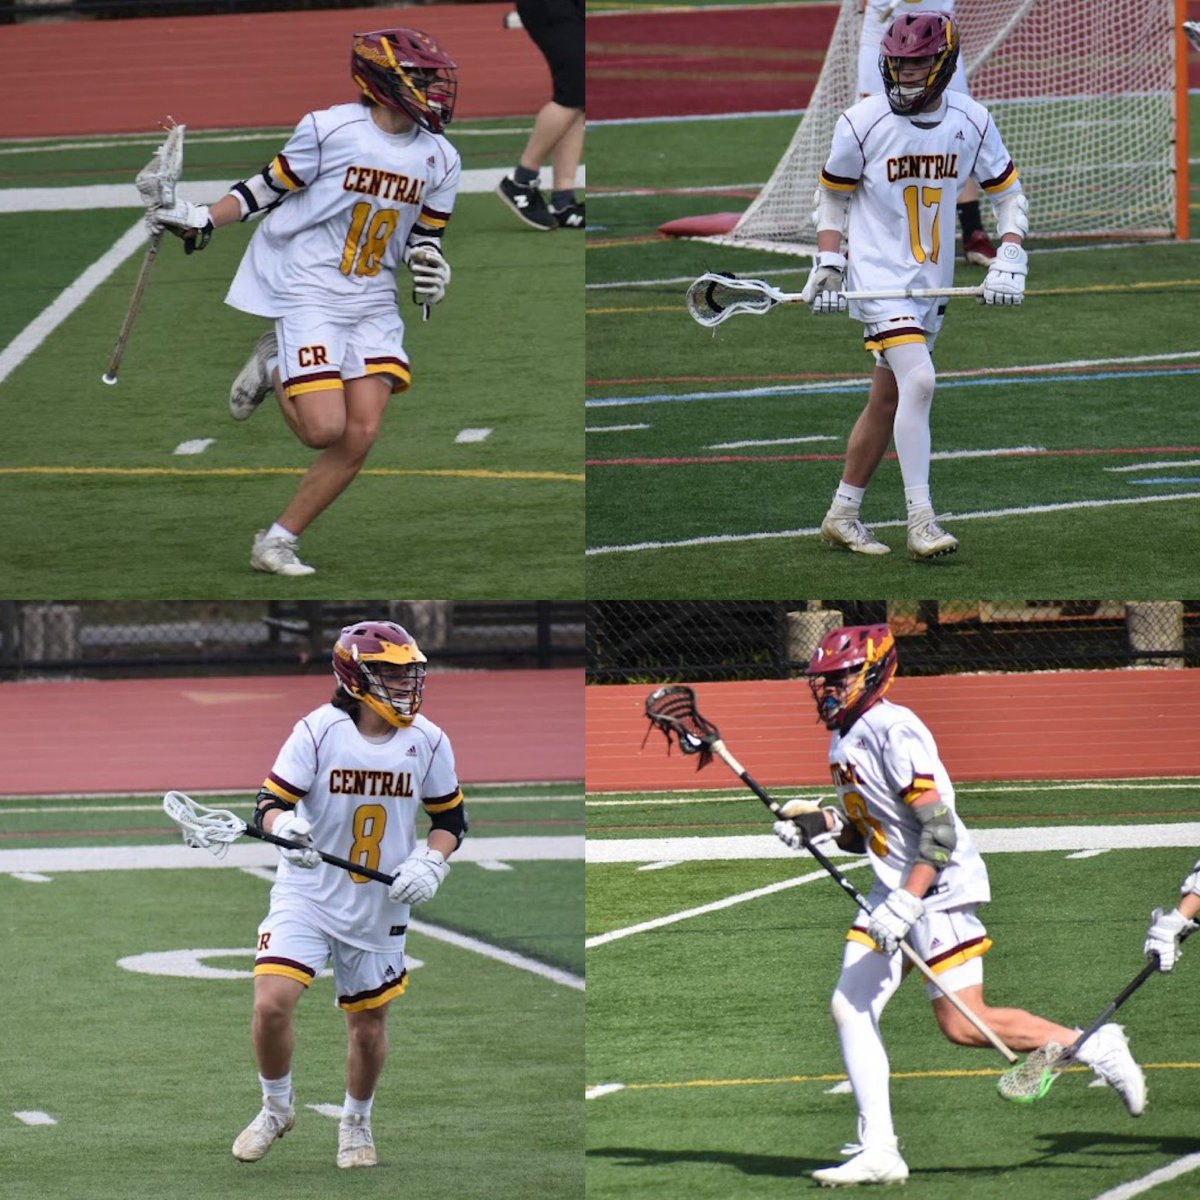 Great Team Effort this afternoon @ Neptune. Your Golden Eagles battled to a 7-3 Win. Congratulations to Matt Abel, Brian Vannote, Evan Sult, Thomas Rotella & Tucker Powderly on their 1st Varsity Goals. Jake Agugliaro had 2 goals. Brady Etzkorn made 16 saves in goal @CR_athletics